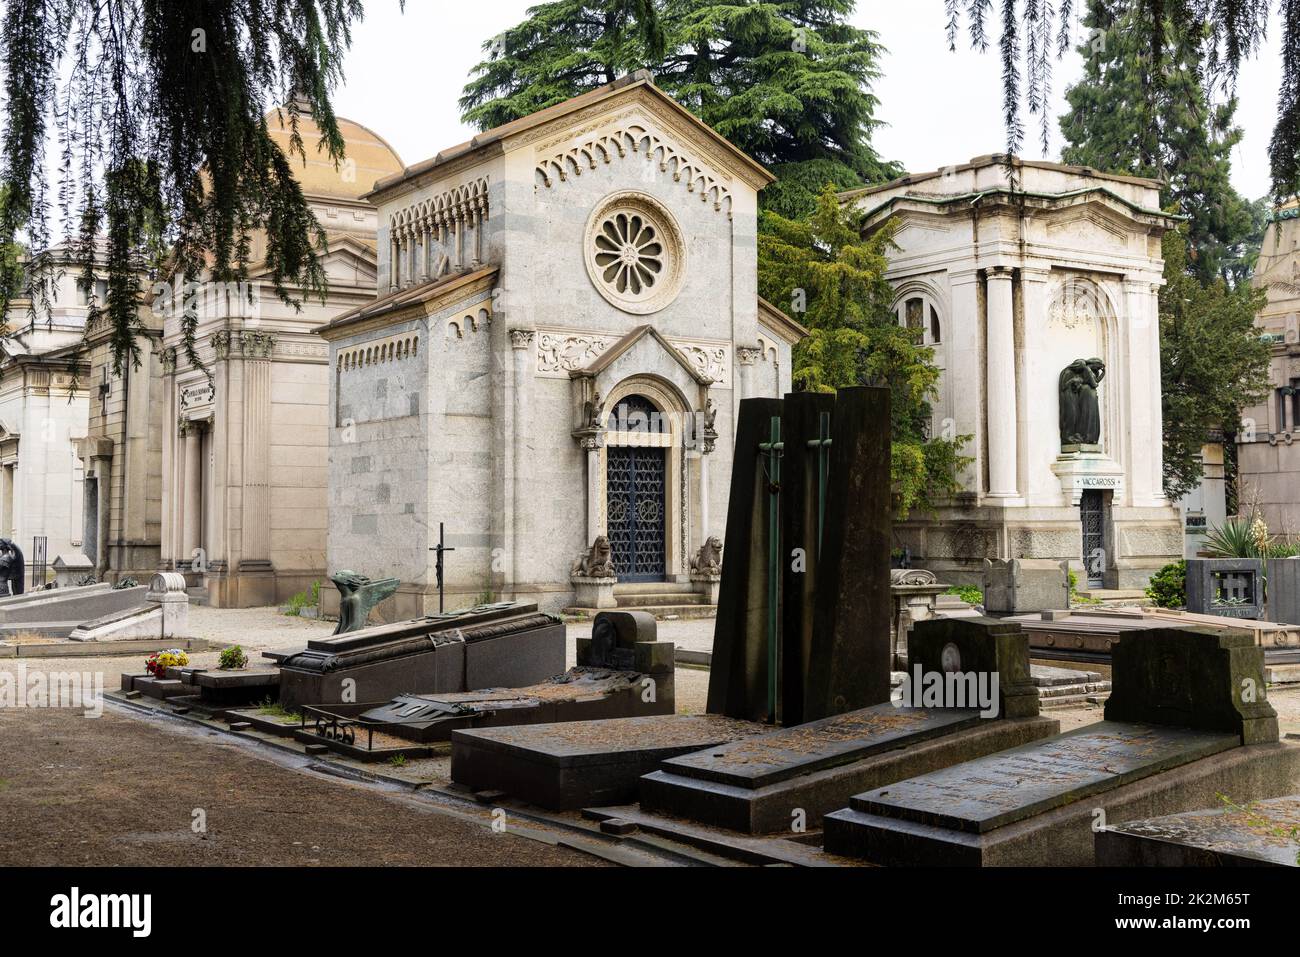 Monumental Cemetery of Milan (Cimitero Monumentale di Milano)  is one of the two largest cemeteries in Milan, Italy with many sculptures and artworks. Stock Photo